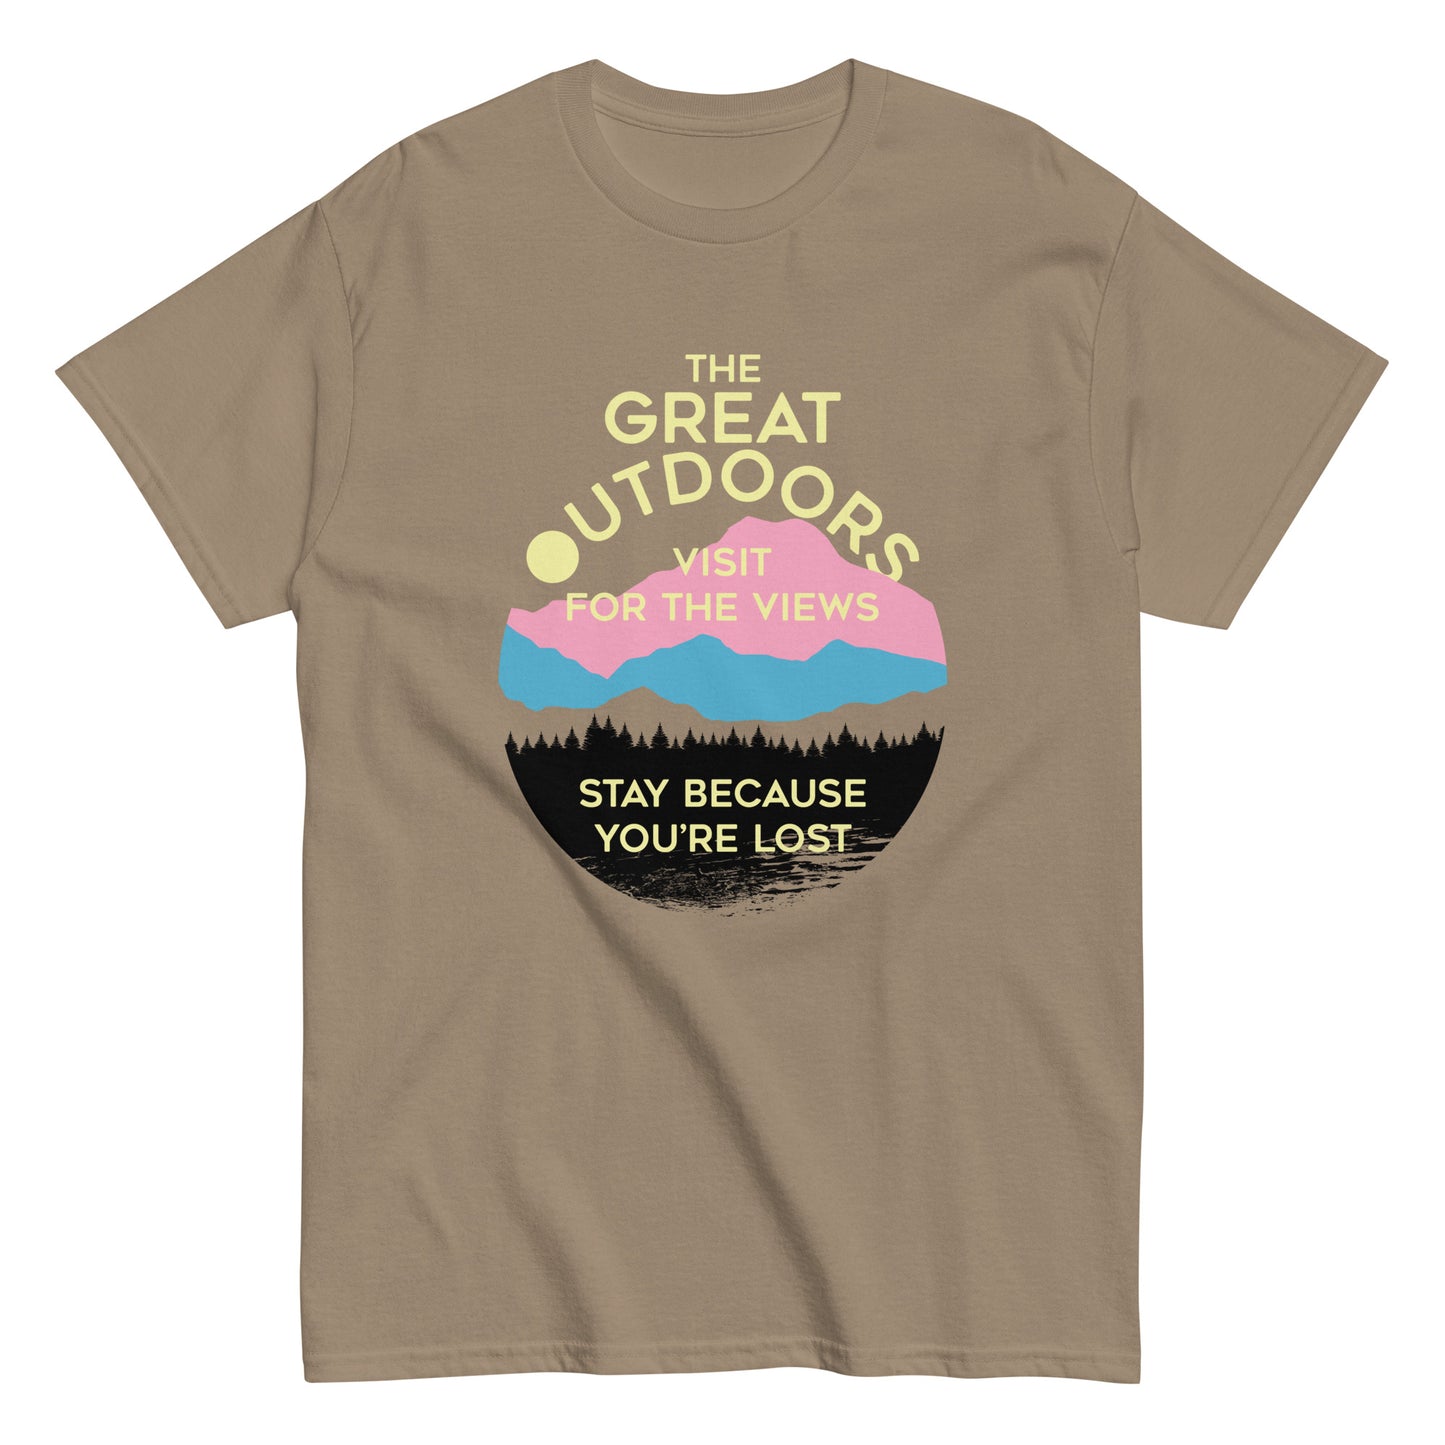 The Great Outdoors Men's Classic Tee